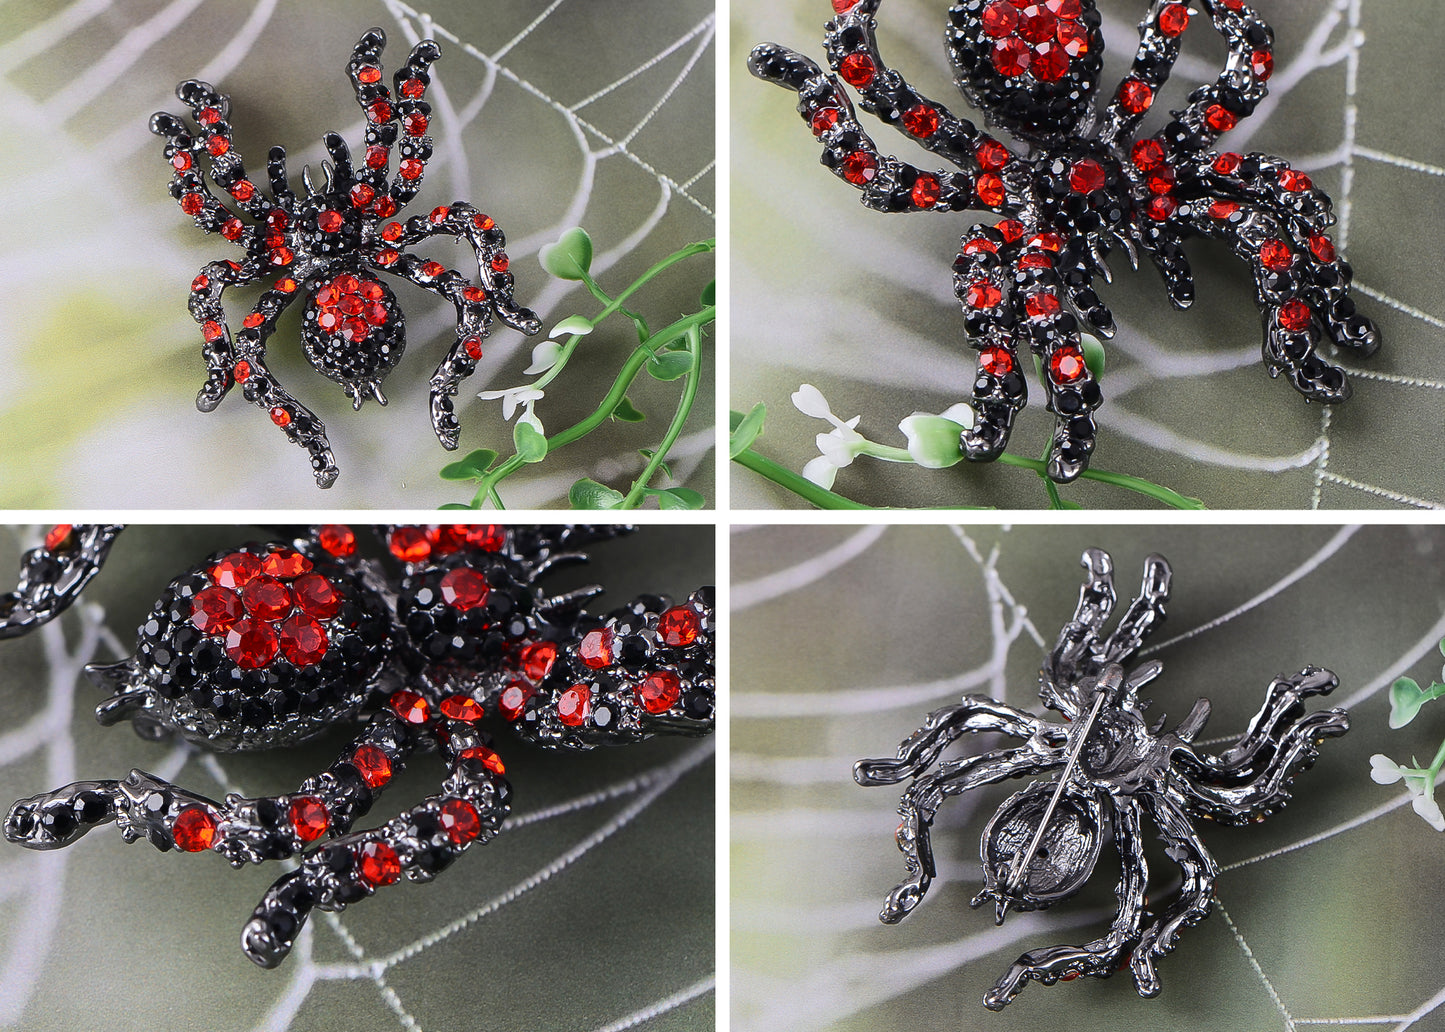 Alilang Black Crystal Rhinestone Spider Brooch Pin Halloween Decoration and Cosplay Accessory Jewelry